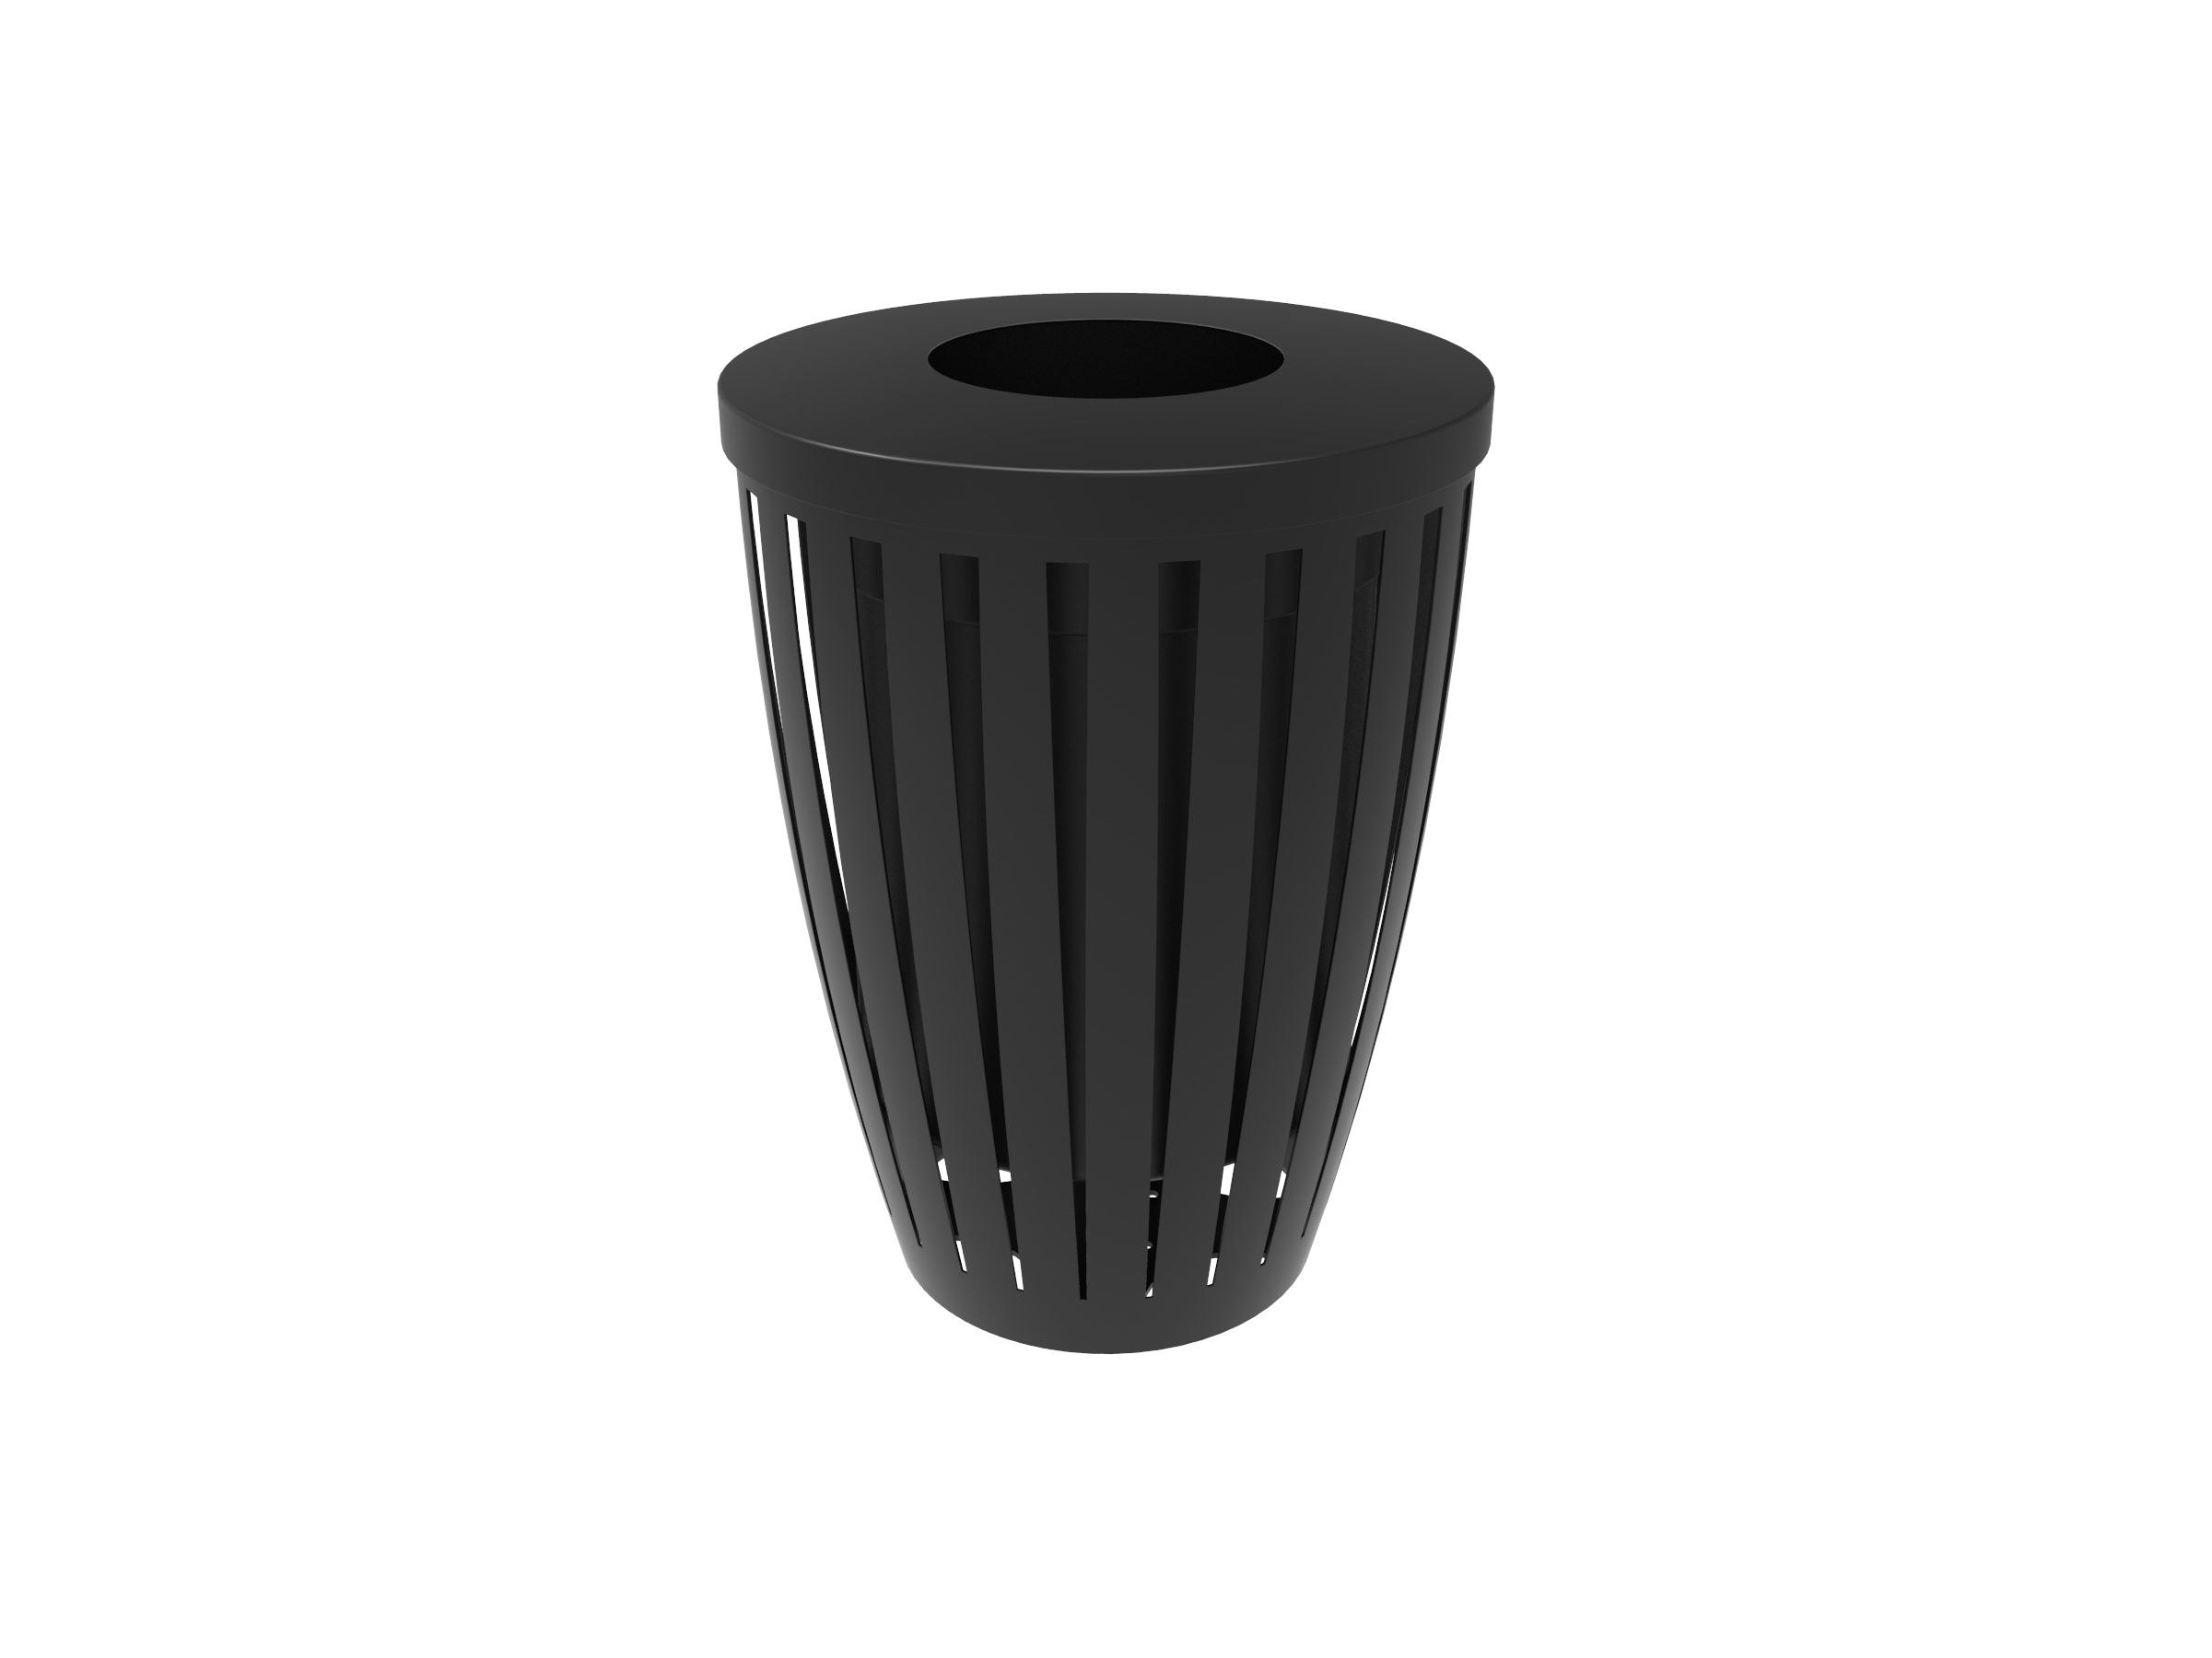 Lexington Downtown Tapered Trash Receptacle with Flattop